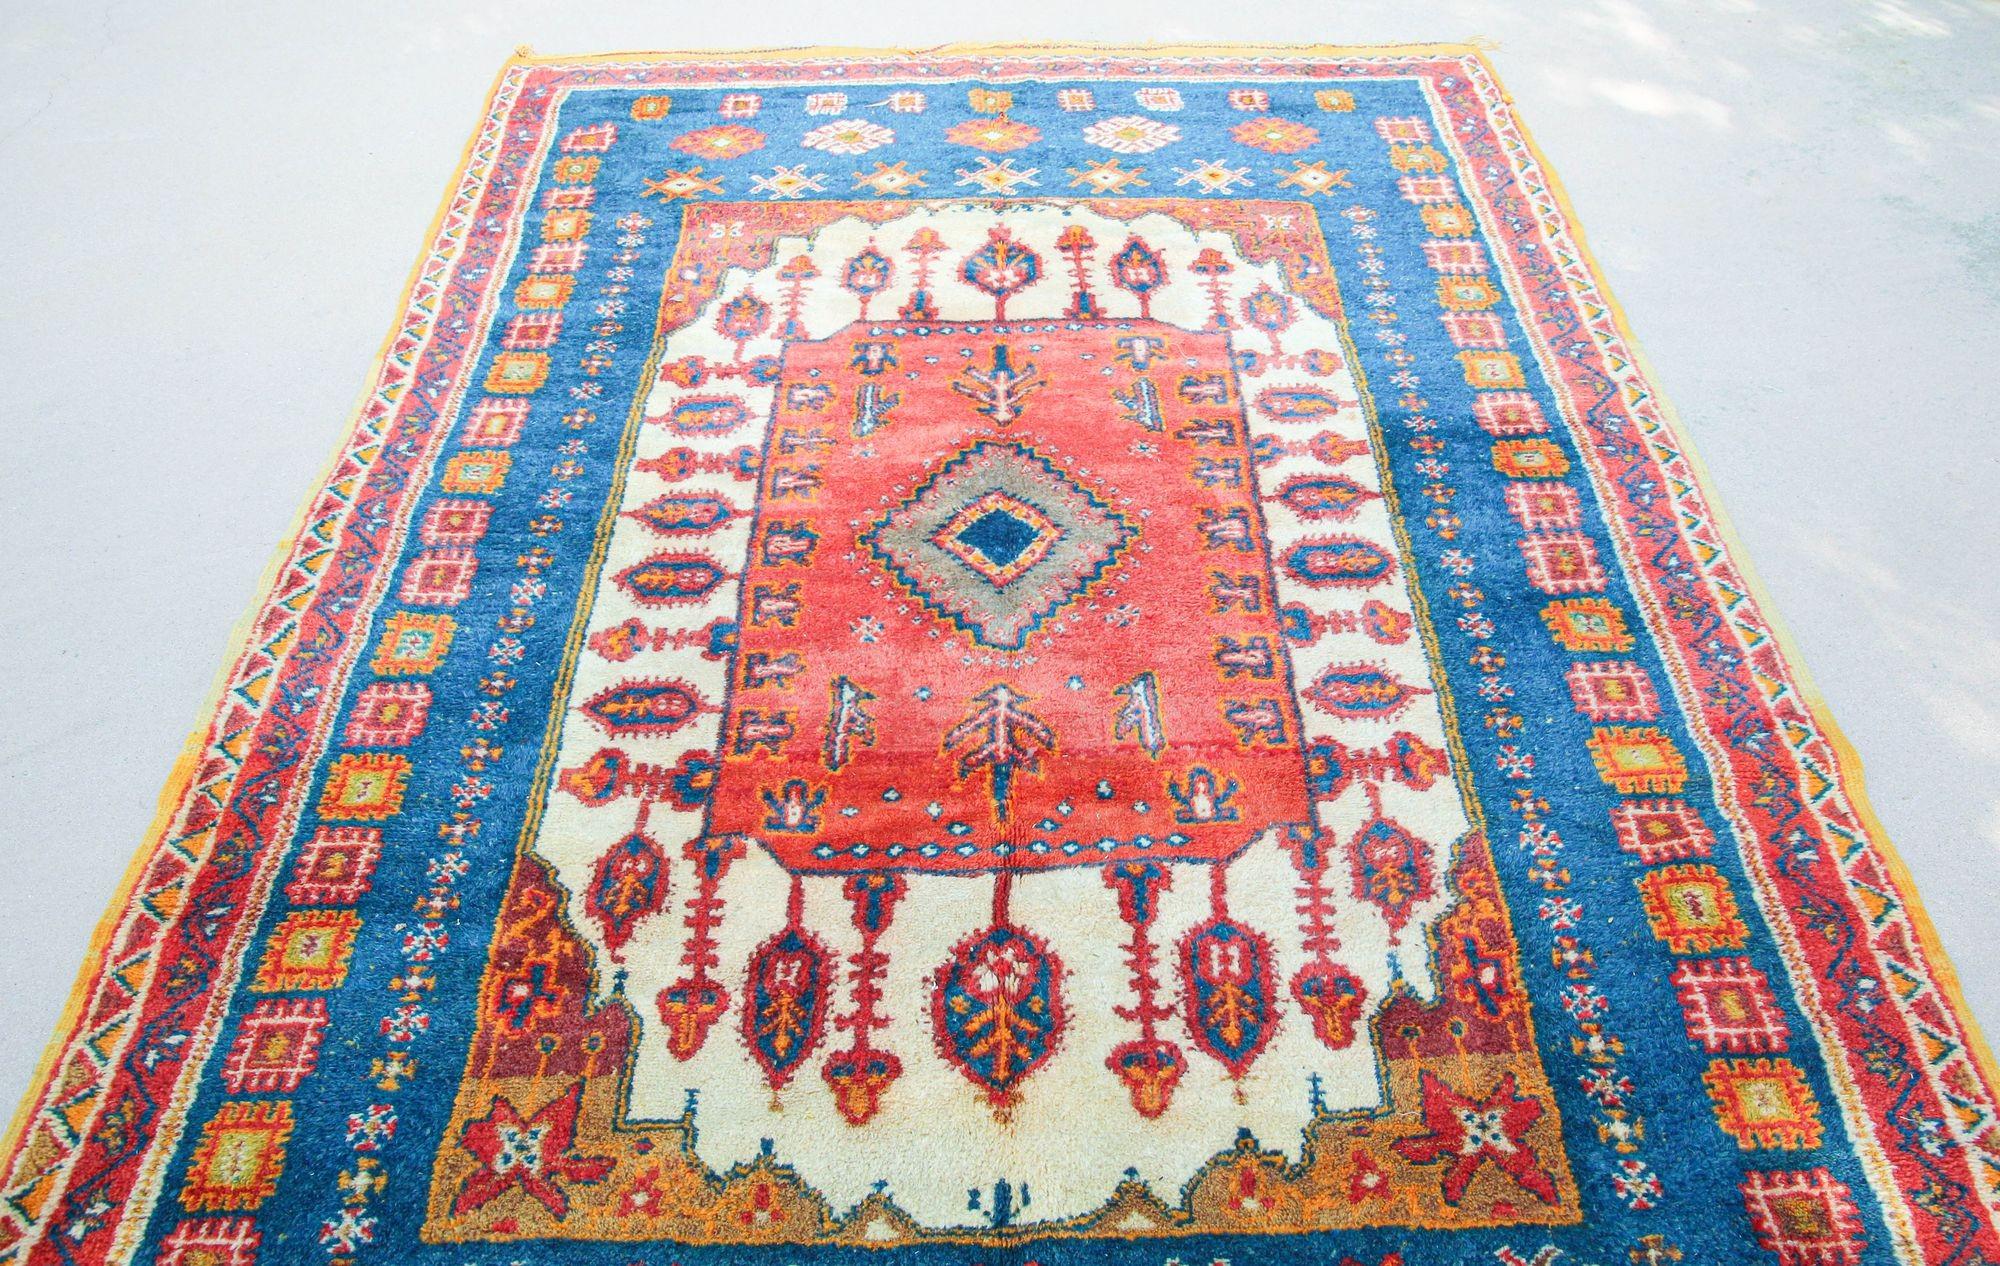 1960s Moroccan Berber Rug in Royal Blue, Pink and Orange Colors For Sale 6